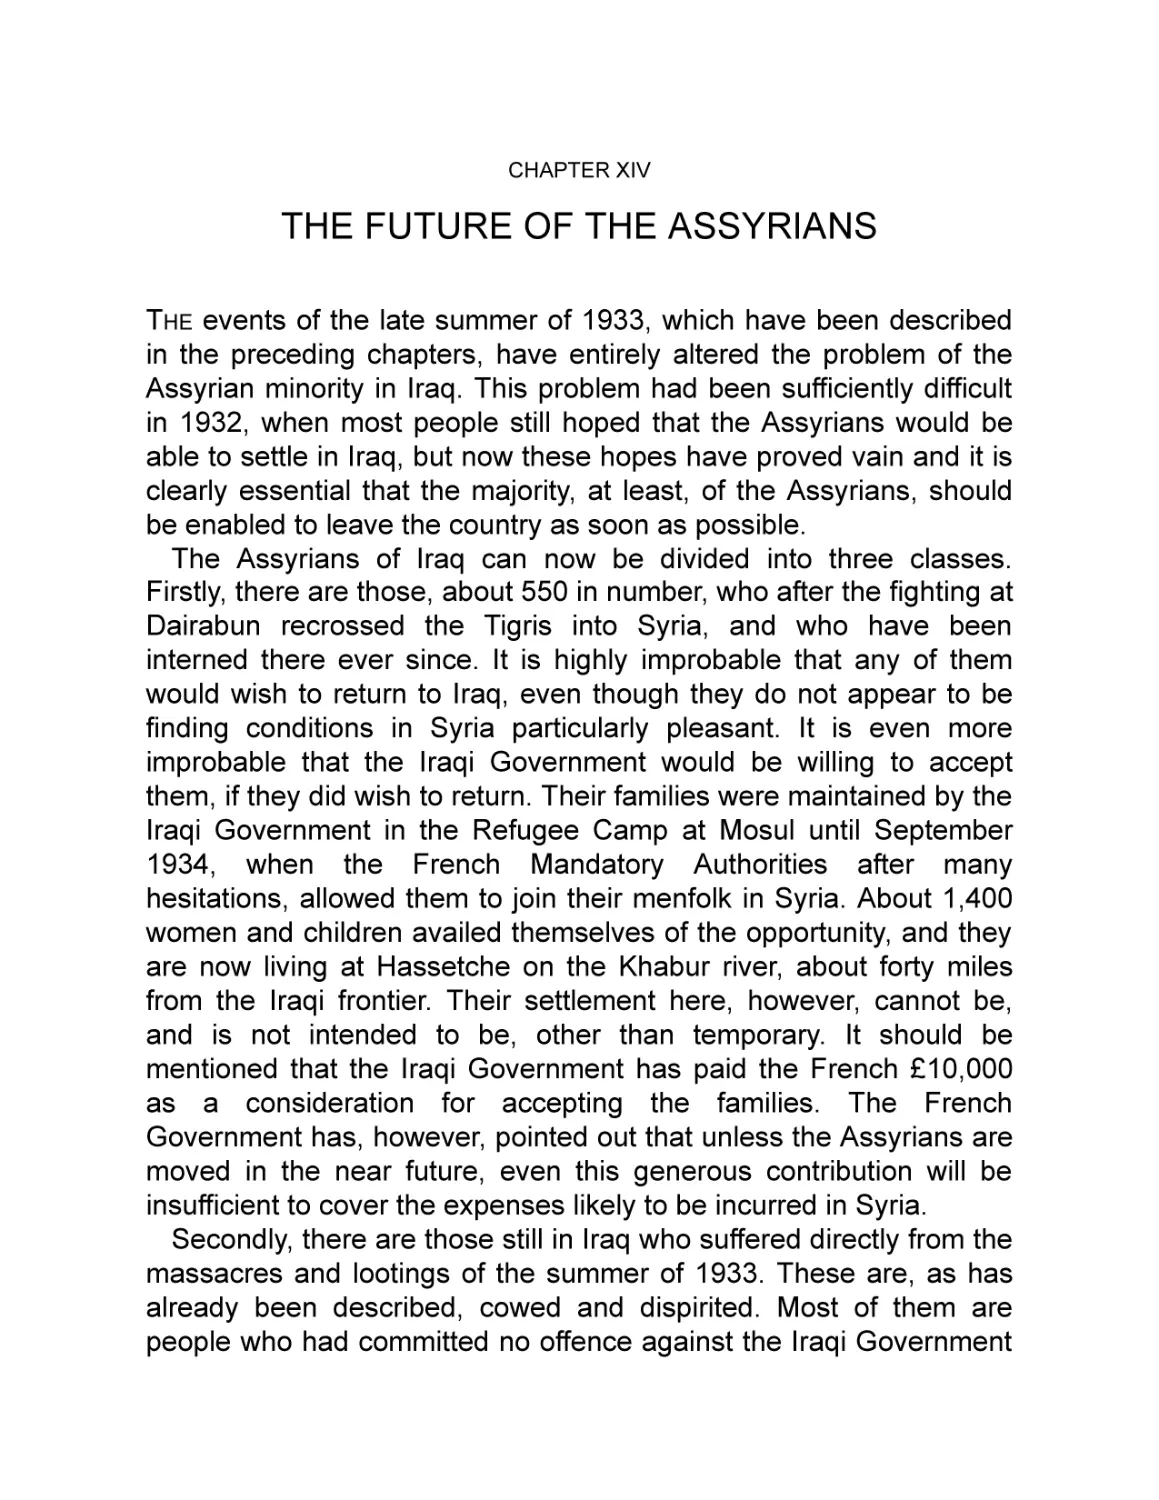 XIV The Future of the Assyrians